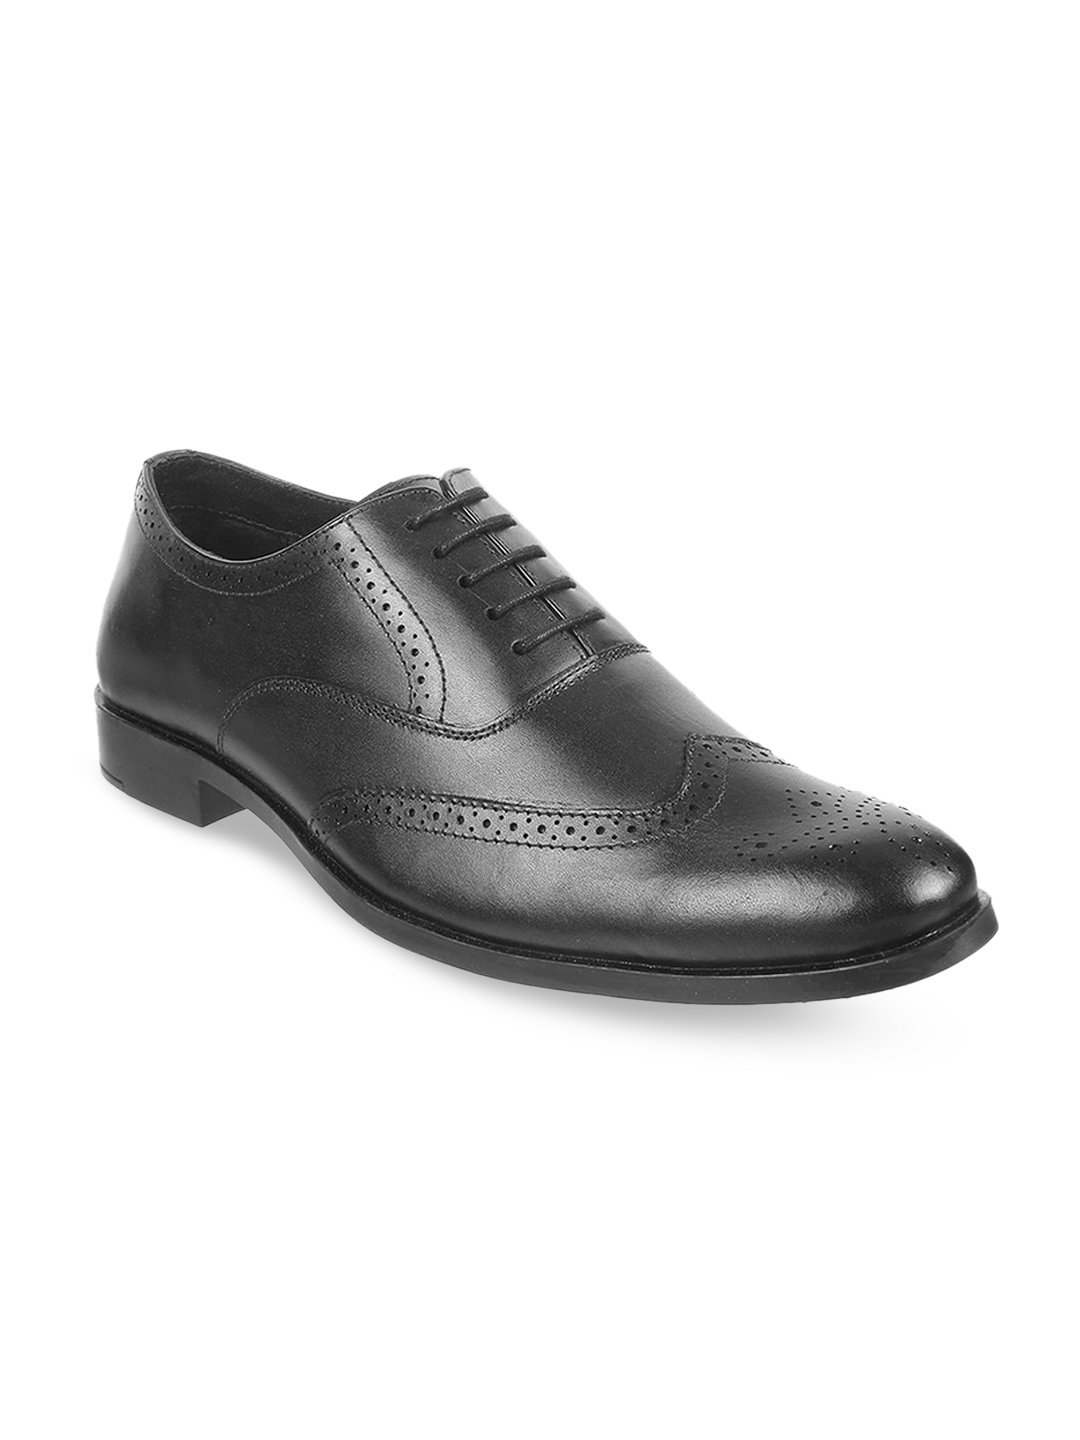 Buy Mochi Men Perforated Leather Formal Brogues - Formal Shoes for Men ...